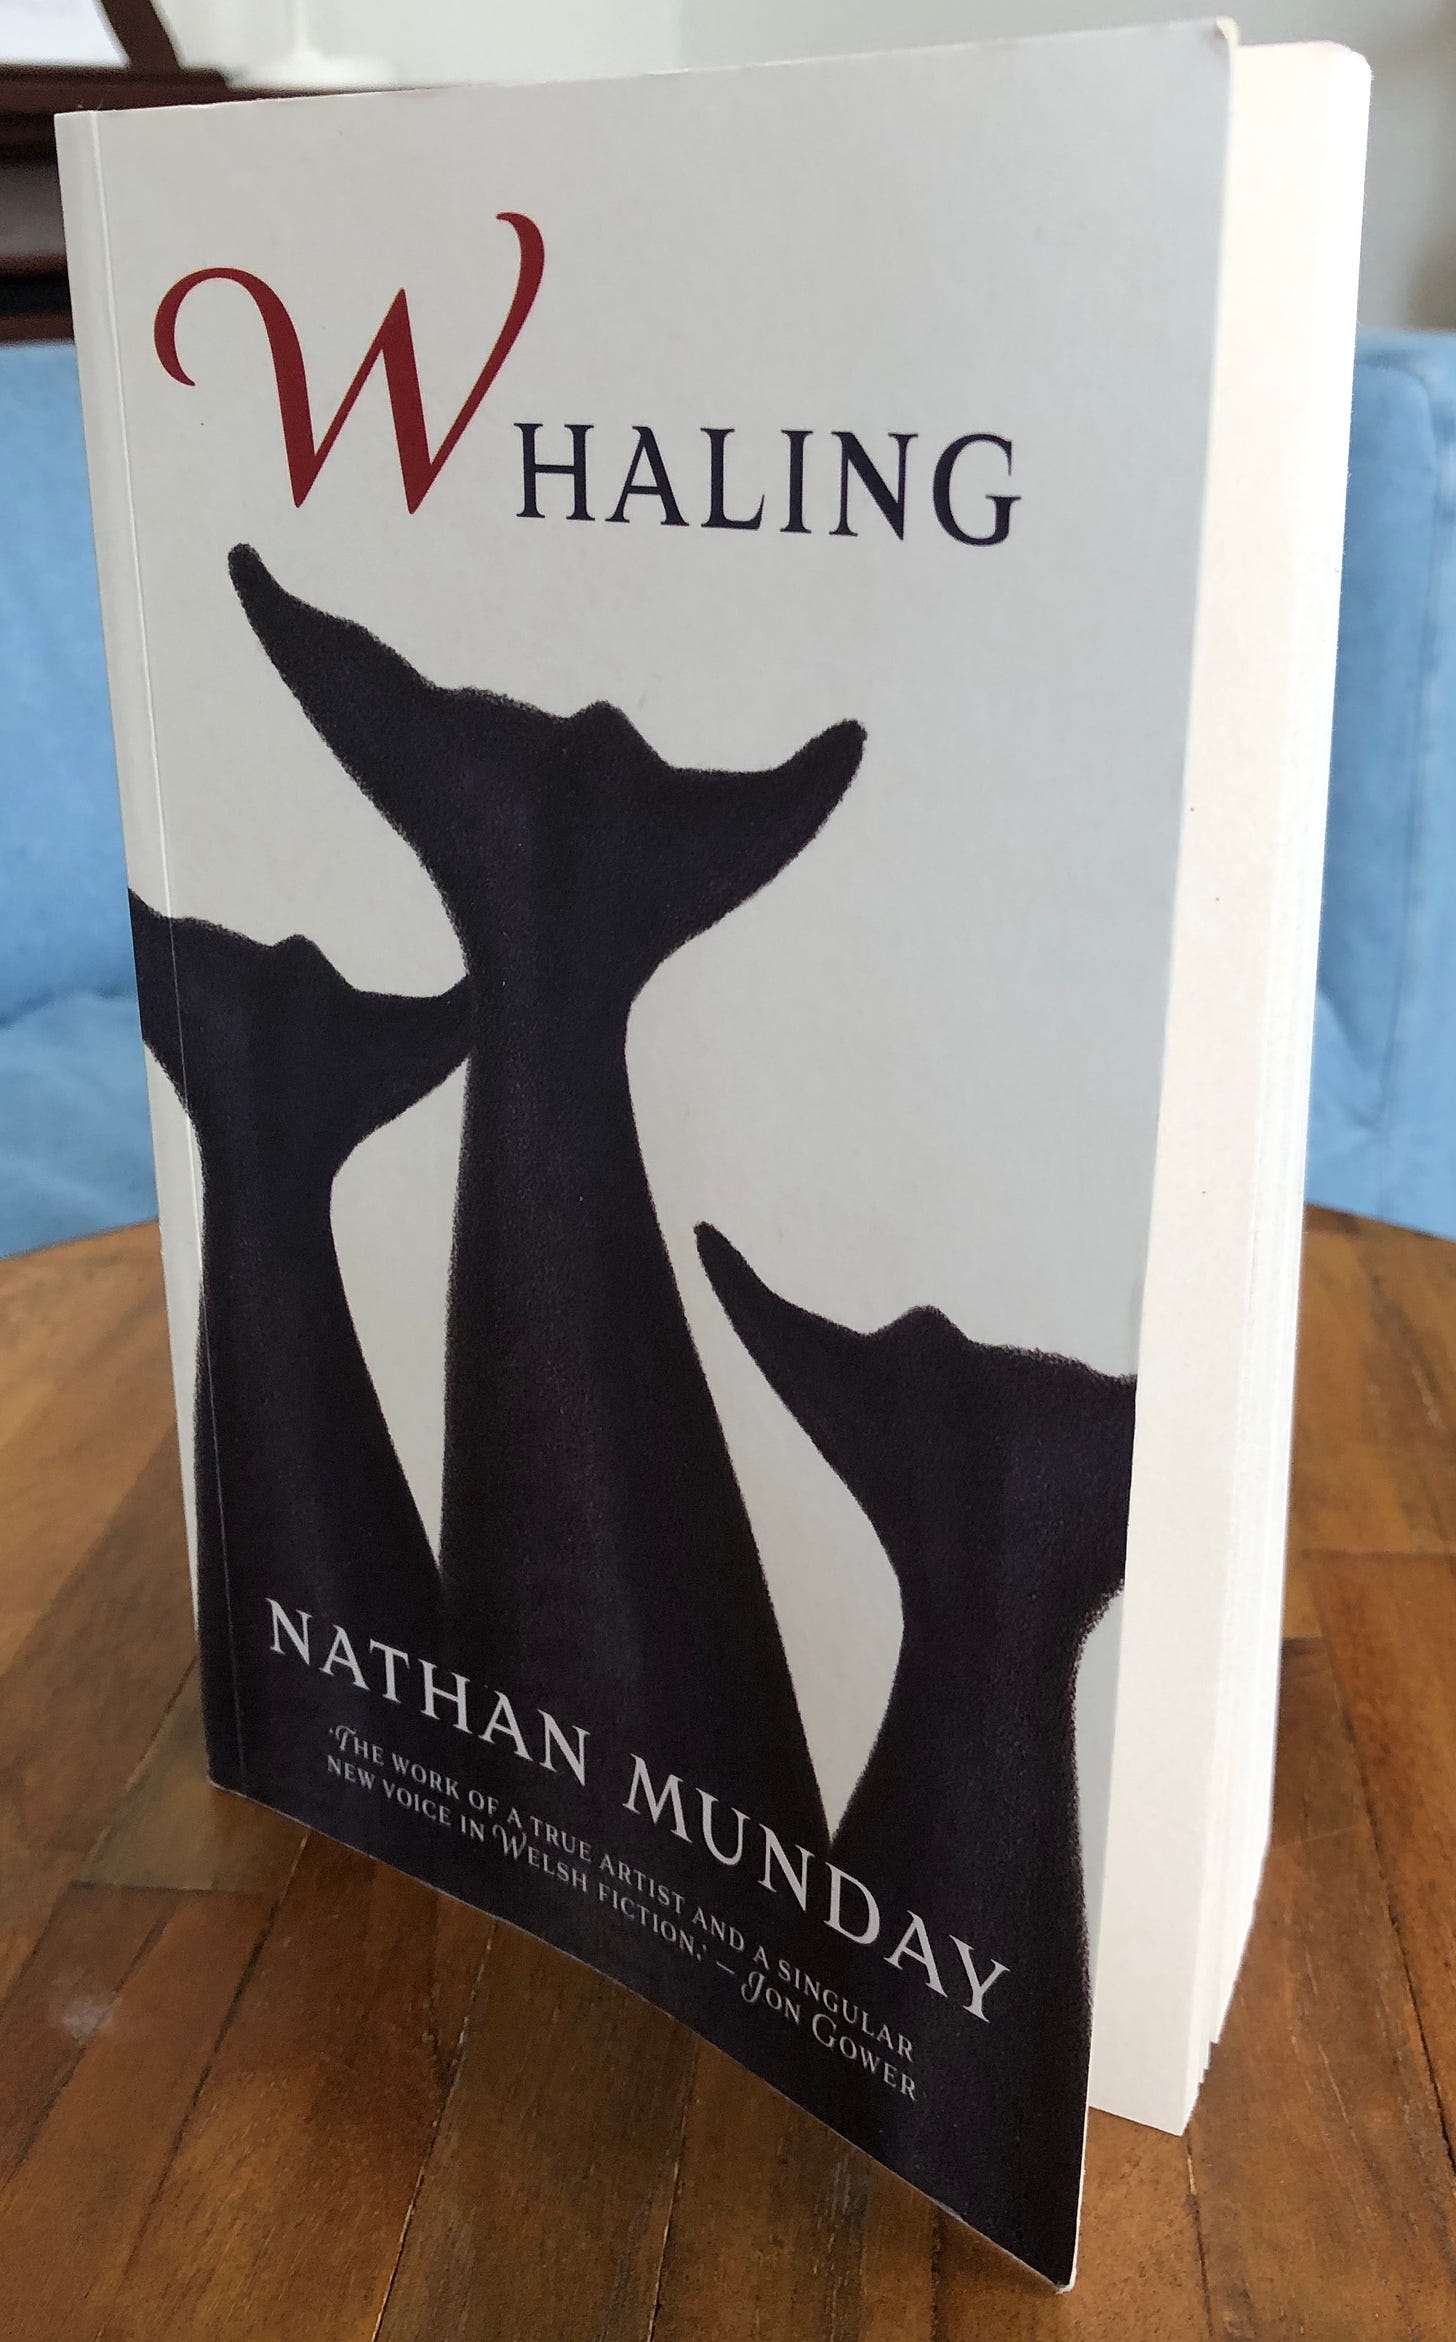 A book, Nathan Munday’s Whaling, stands on a round wooden table in front of a couch.